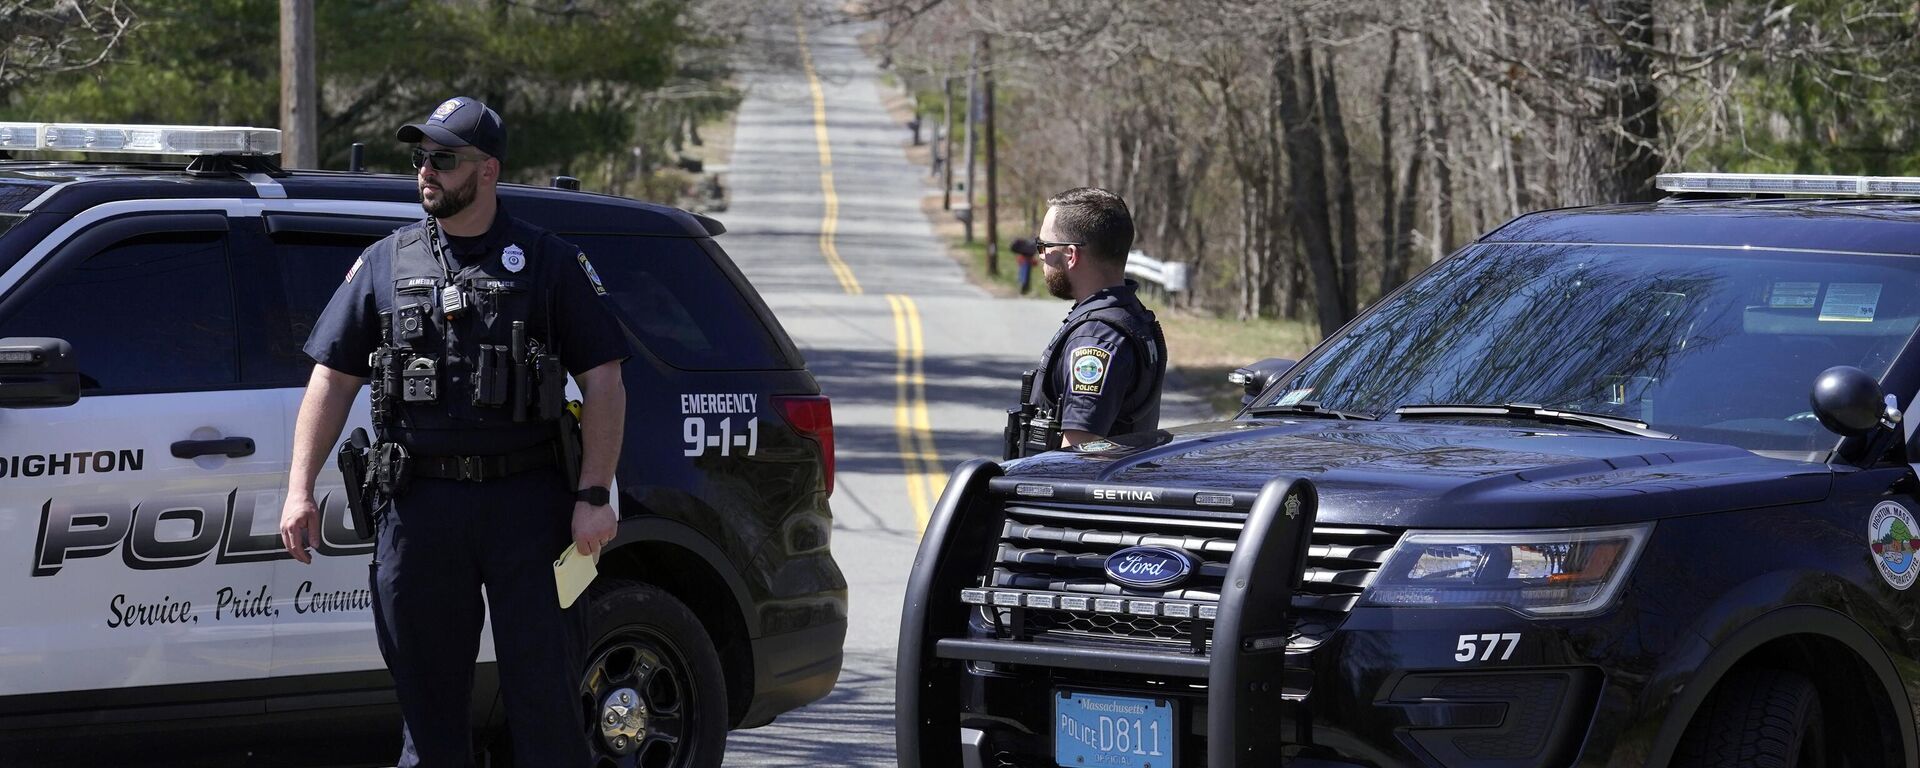 Members of Dighton Police Department stand at a road block, Thursday, April 13, 2023, in Dighton, Mass., about one half a mile from where FBI agents converged on the home of a Massachusetts Air National Guard member who has emerged as a main person of interest in the disclosure of highly classified military documents on the Ukraine. The guardsman was identified as 21-year-old Jack Teixeira. - Sputnik International, 1920, 05.07.2023